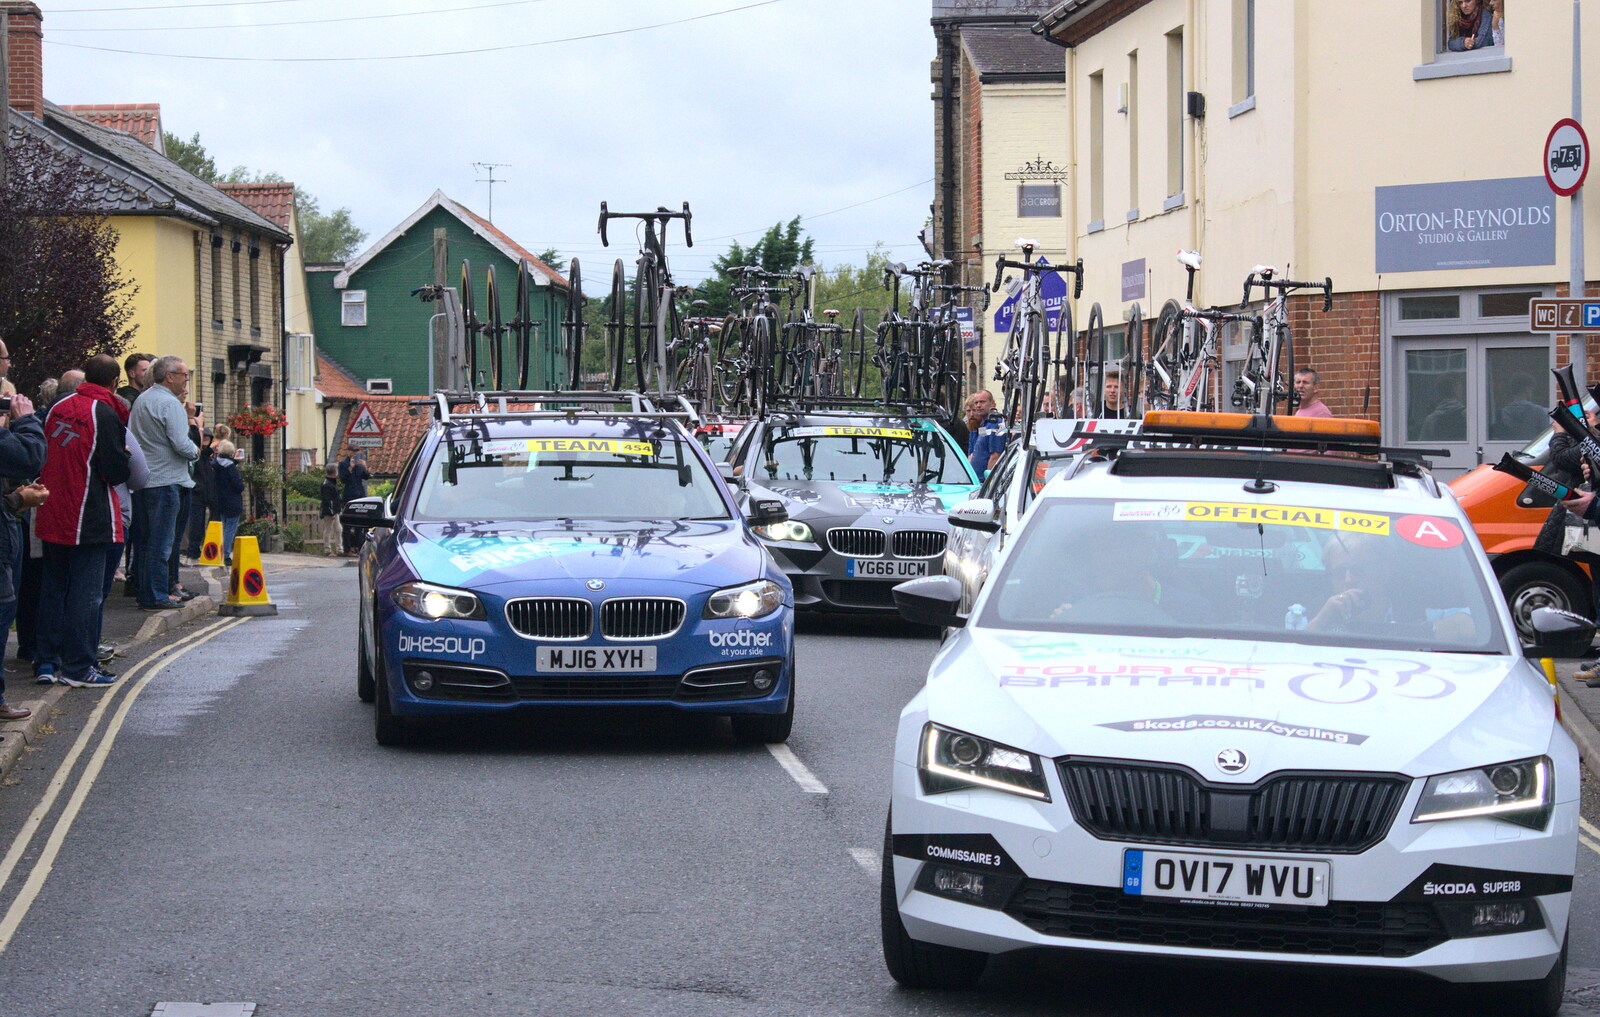 The first tranch of team cars piles through from The Tour of Britain Does Eye, Suffolk - 8th September 2017